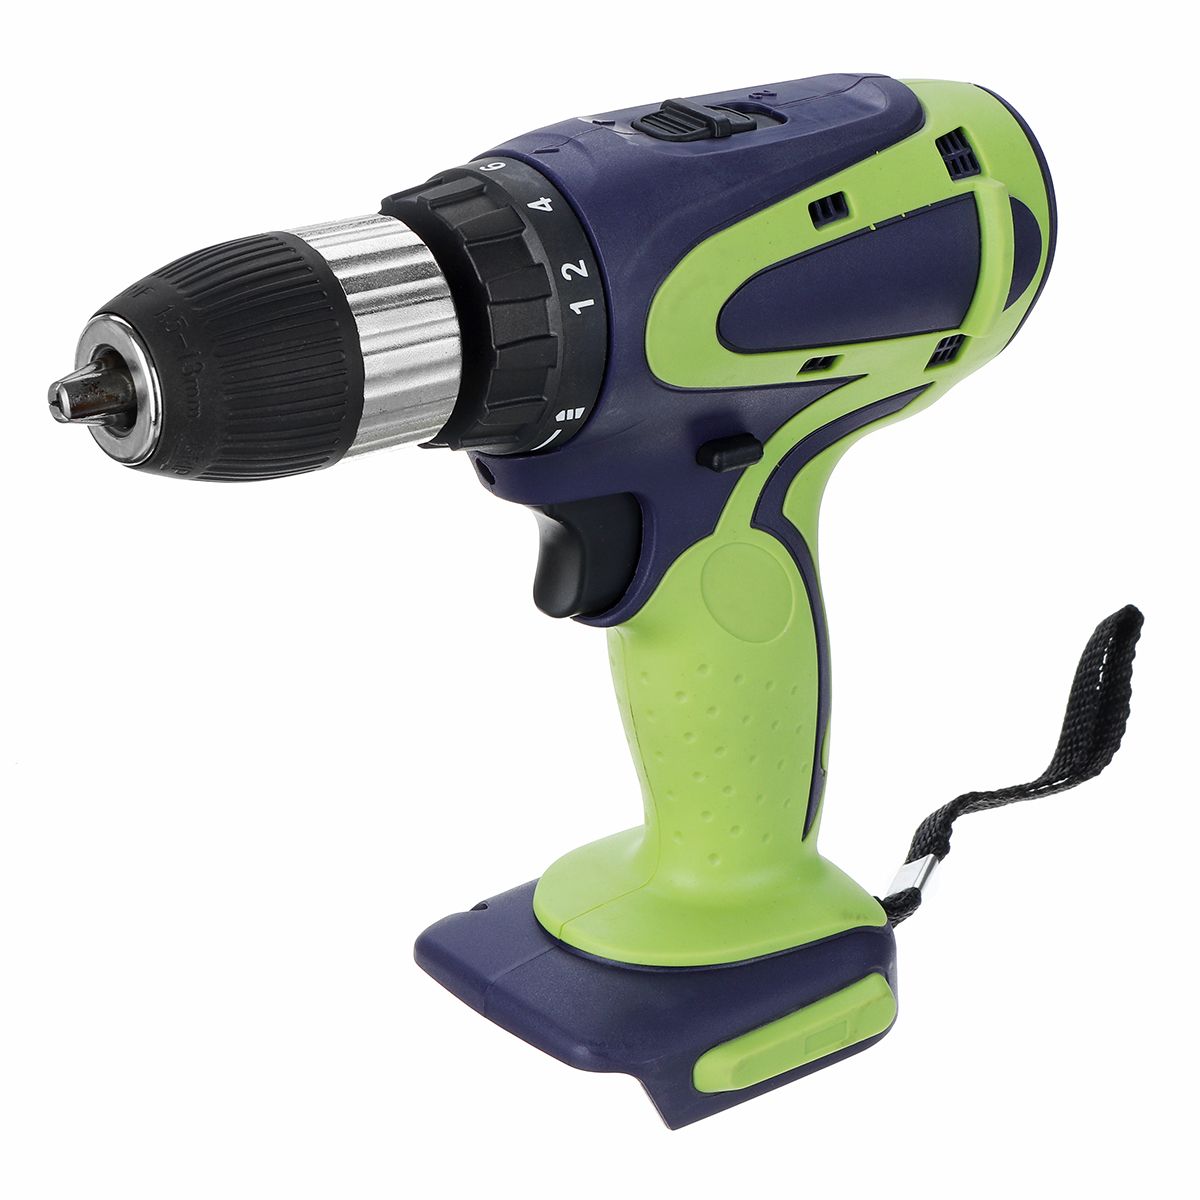 13mm-Chuck-Cordless-Electric-Drill-For-Makita-18V-Battery-4000RPM-LED-Light-Power-Drills-350Nm-1642844